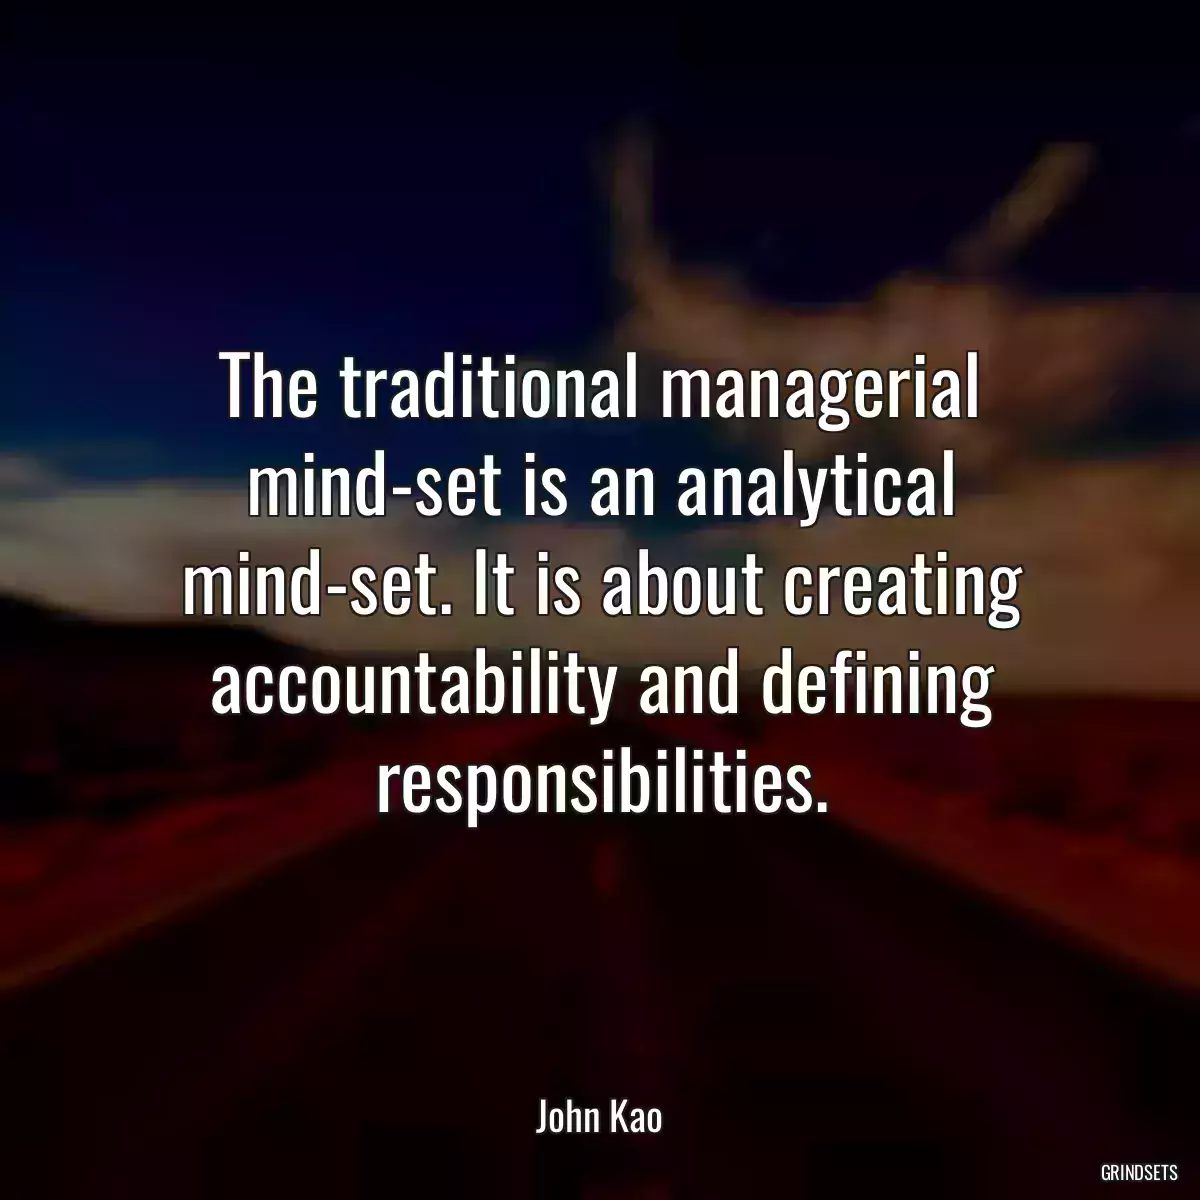 The traditional managerial mind-set is an analytical mind-set. It is about creating accountability and defining responsibilities.